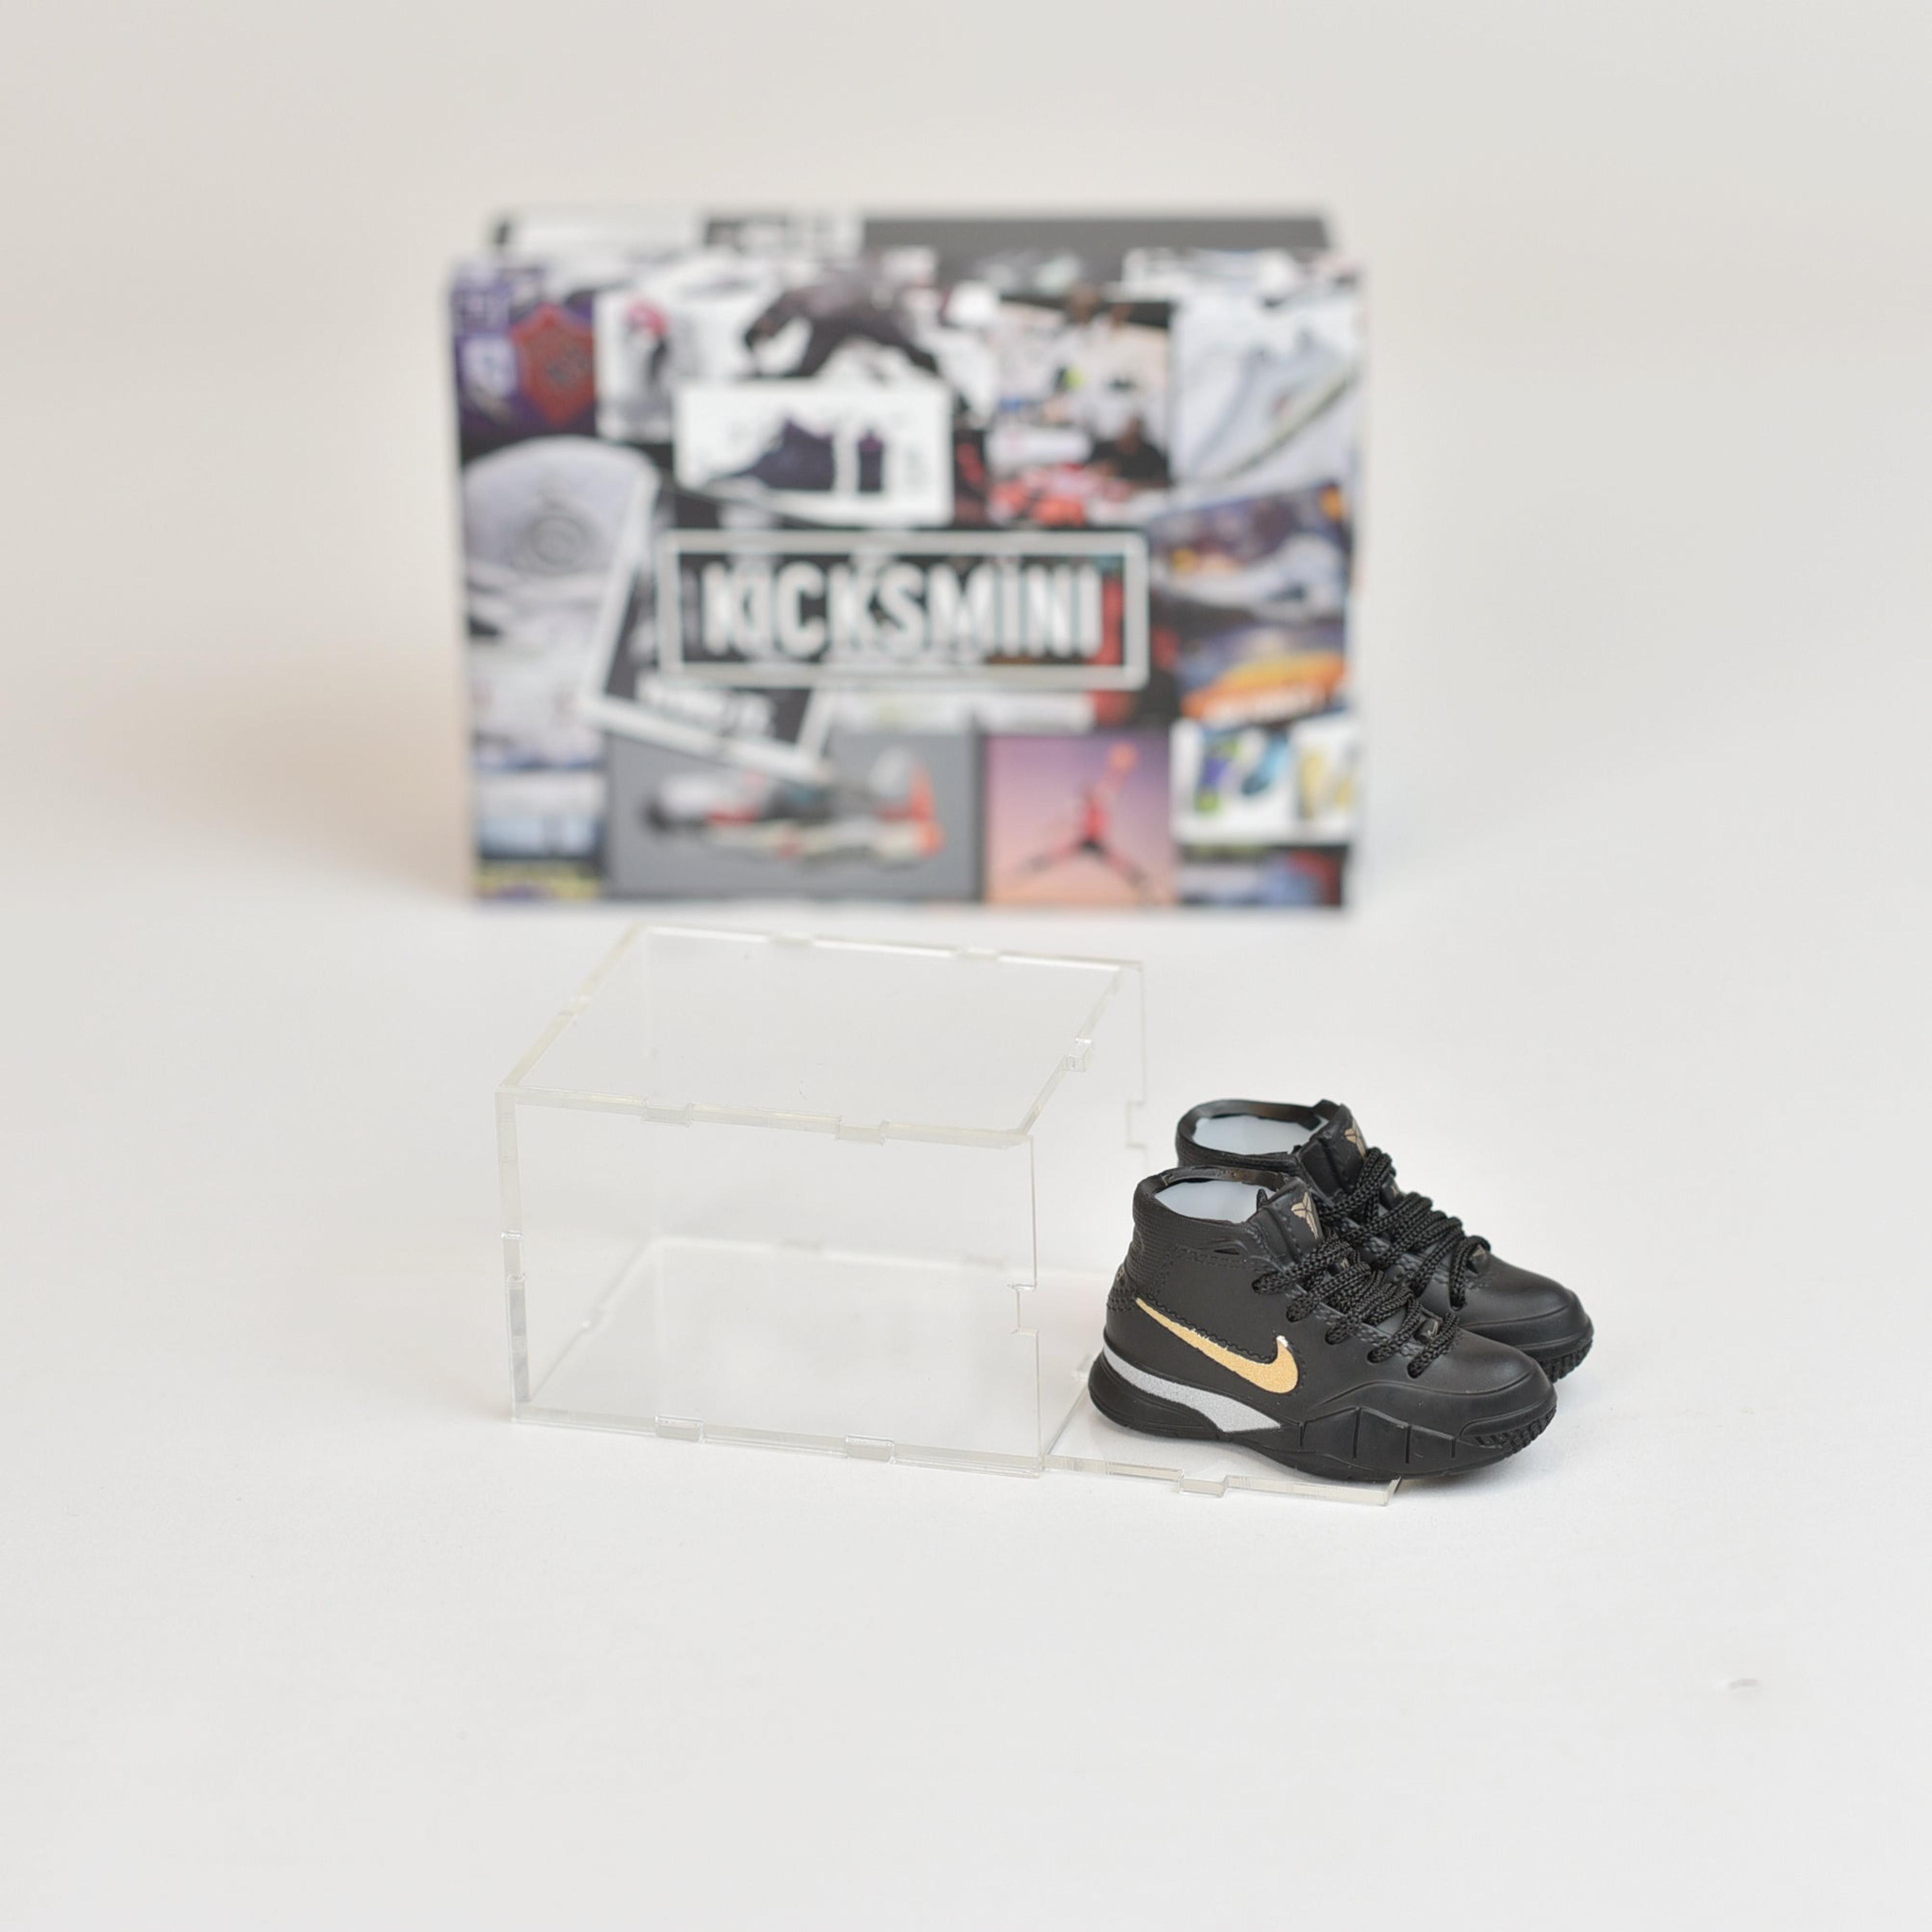 Alternate View 23 of Kobe Bryant/LeBron James/Steph Curry Mini Sneaker Collection wit